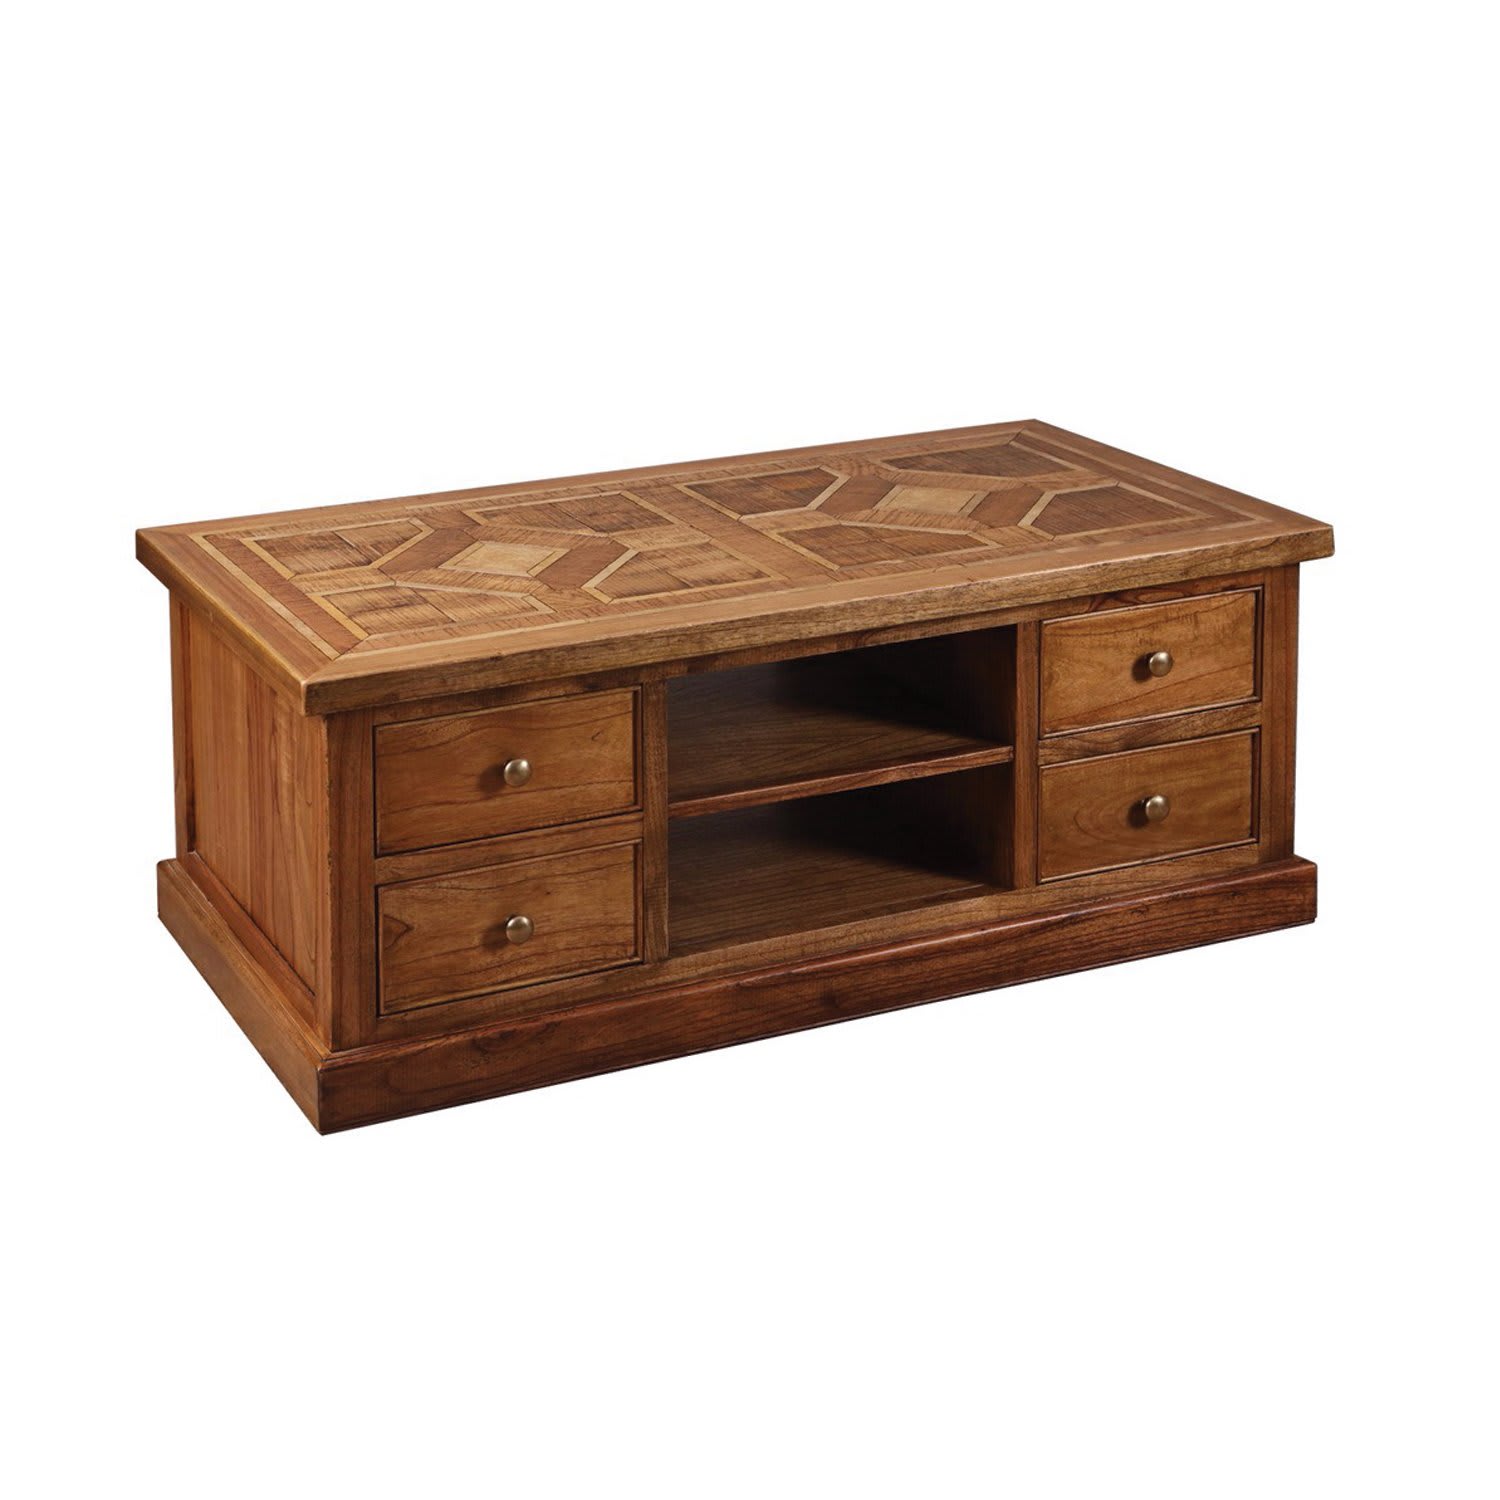 Patterned Inlay Top 4 Drawer Unit